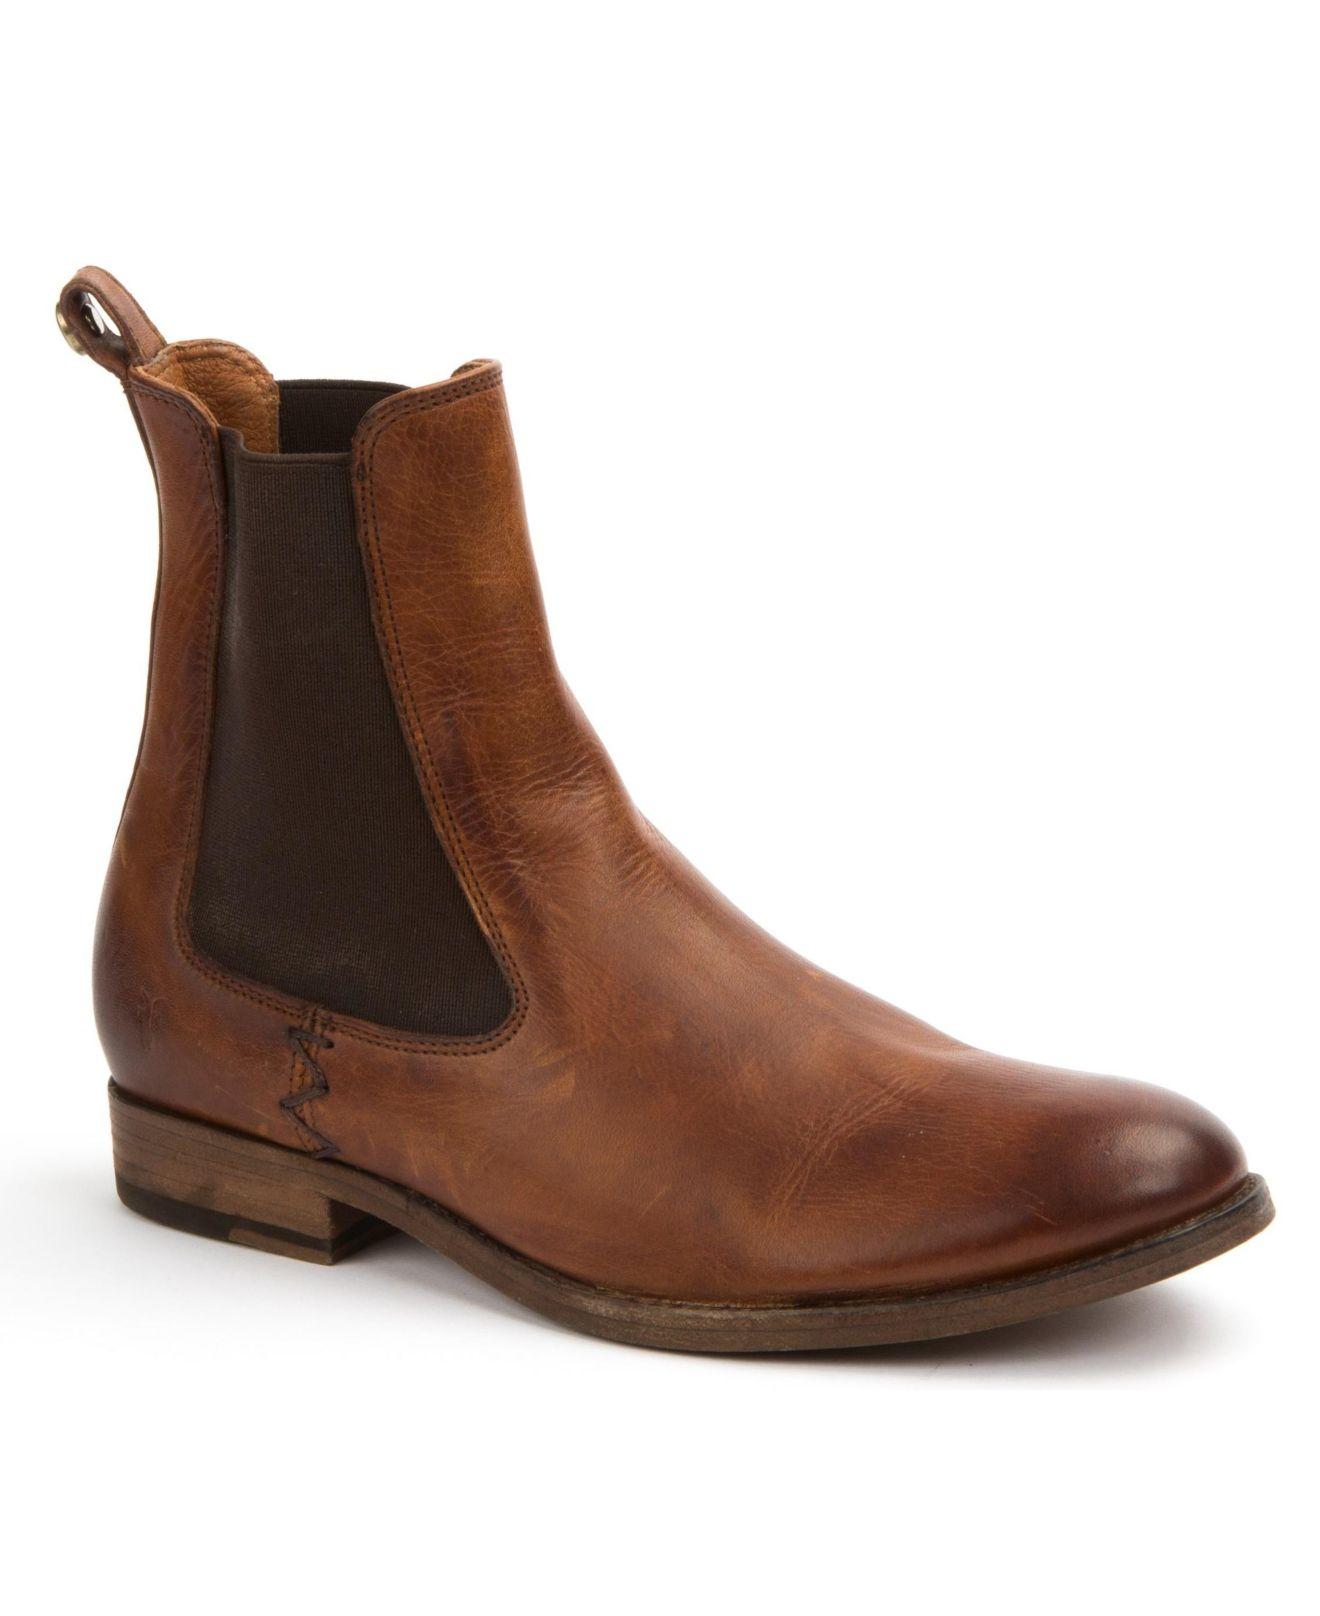 Frye Melissa Chelsea Leather Boots in Cognac (Brown) - Lyst